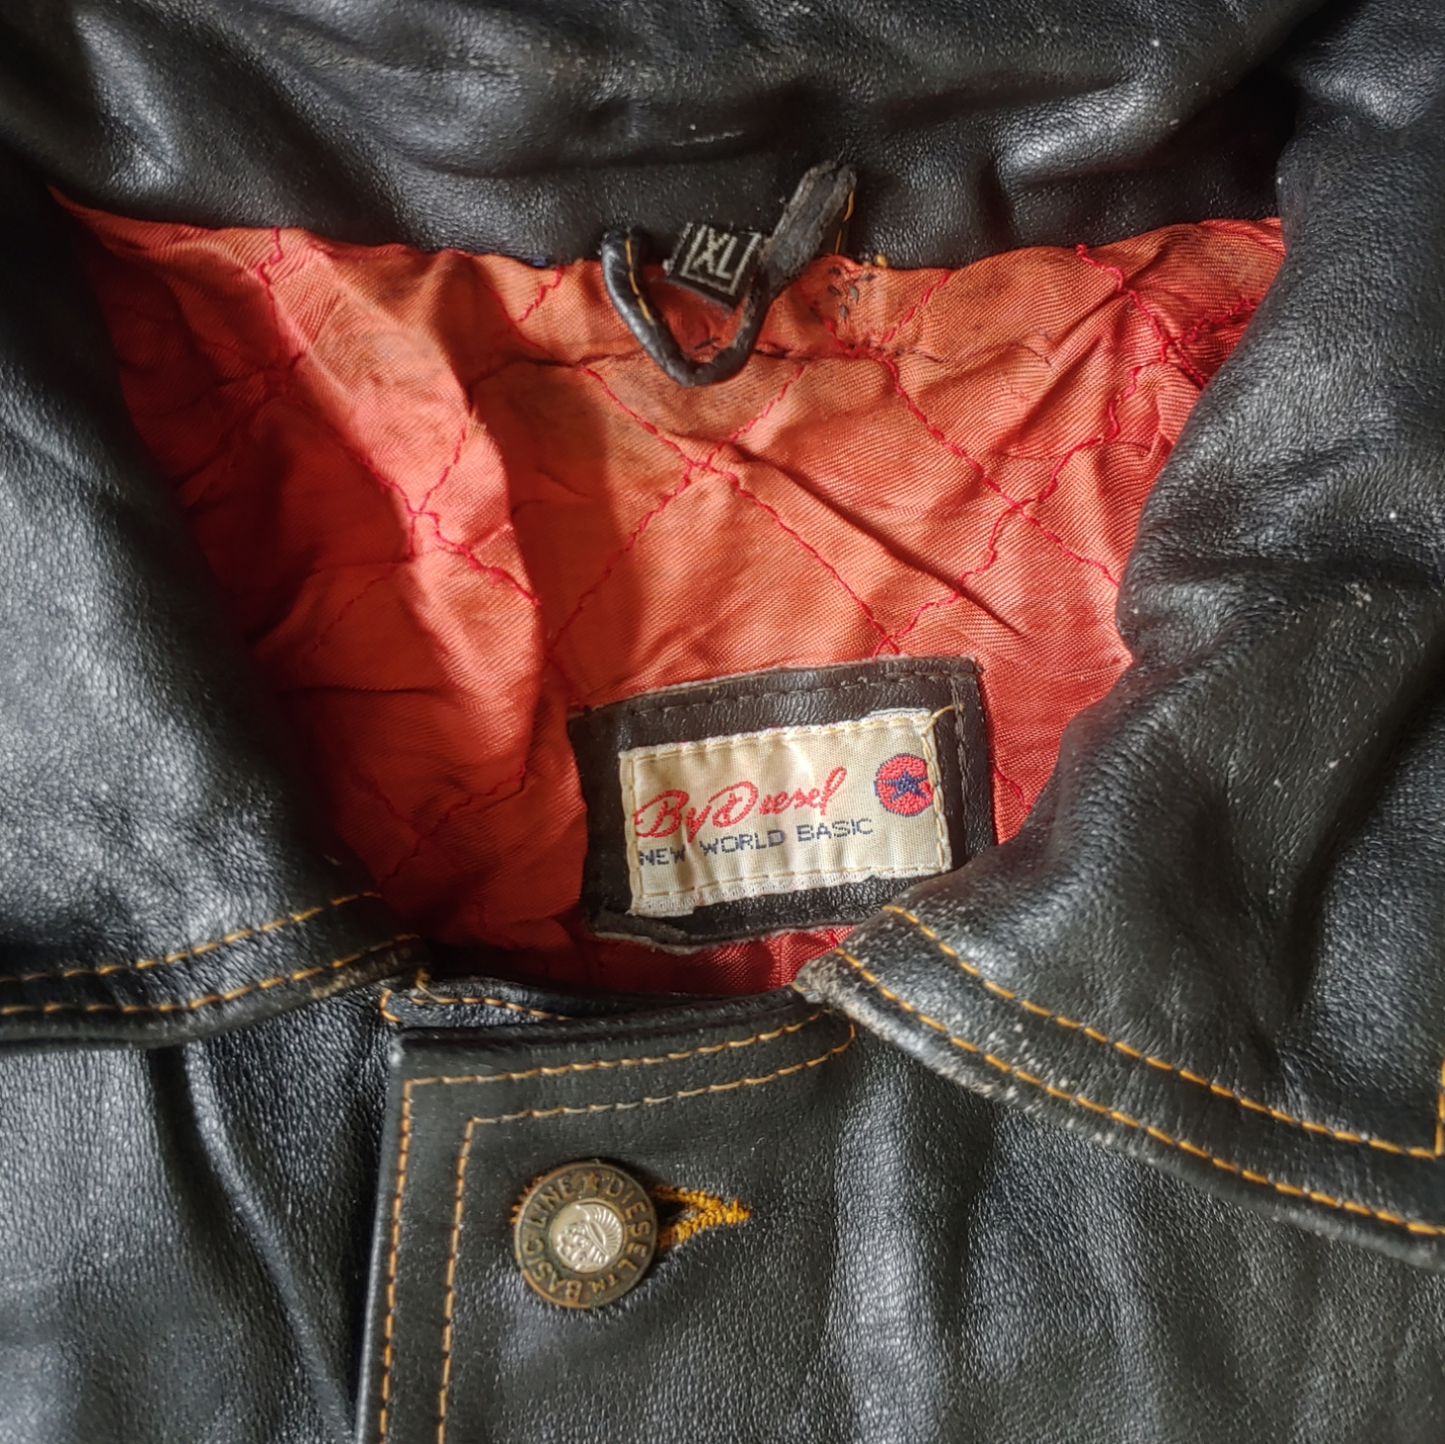 Vintage 1990s Diesel New World Basic Only The Brave Black Leather Trucker Jacket With Back Embroidered Face Logo Label - Casspios Dream